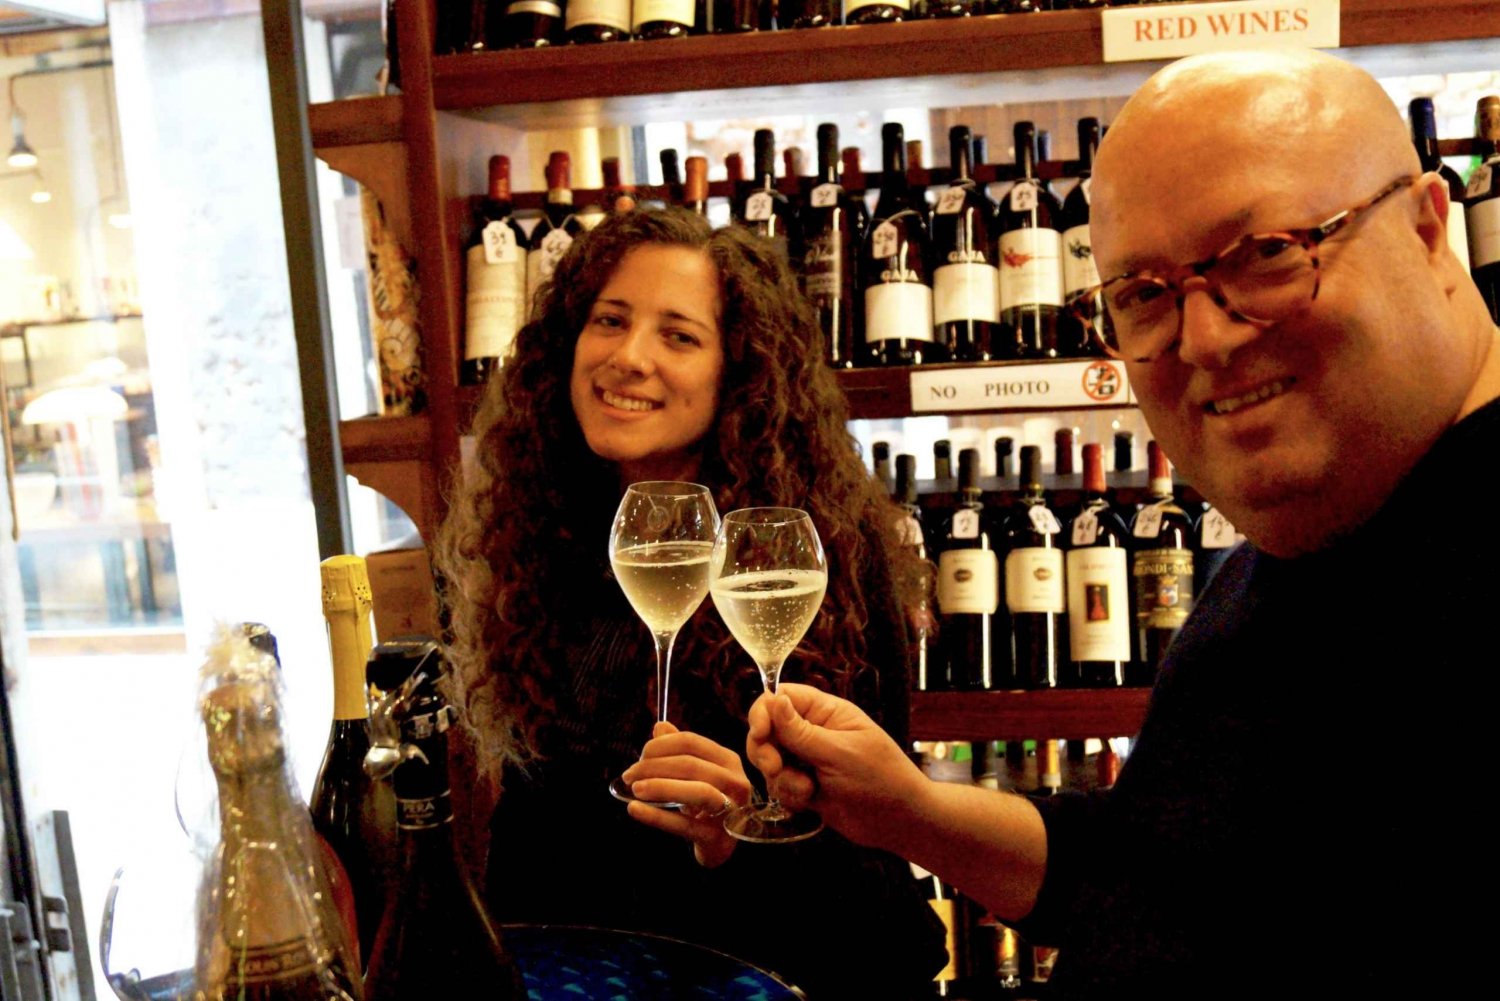 Venice: Italian Prosecco or Red Wine Tasting Expereince